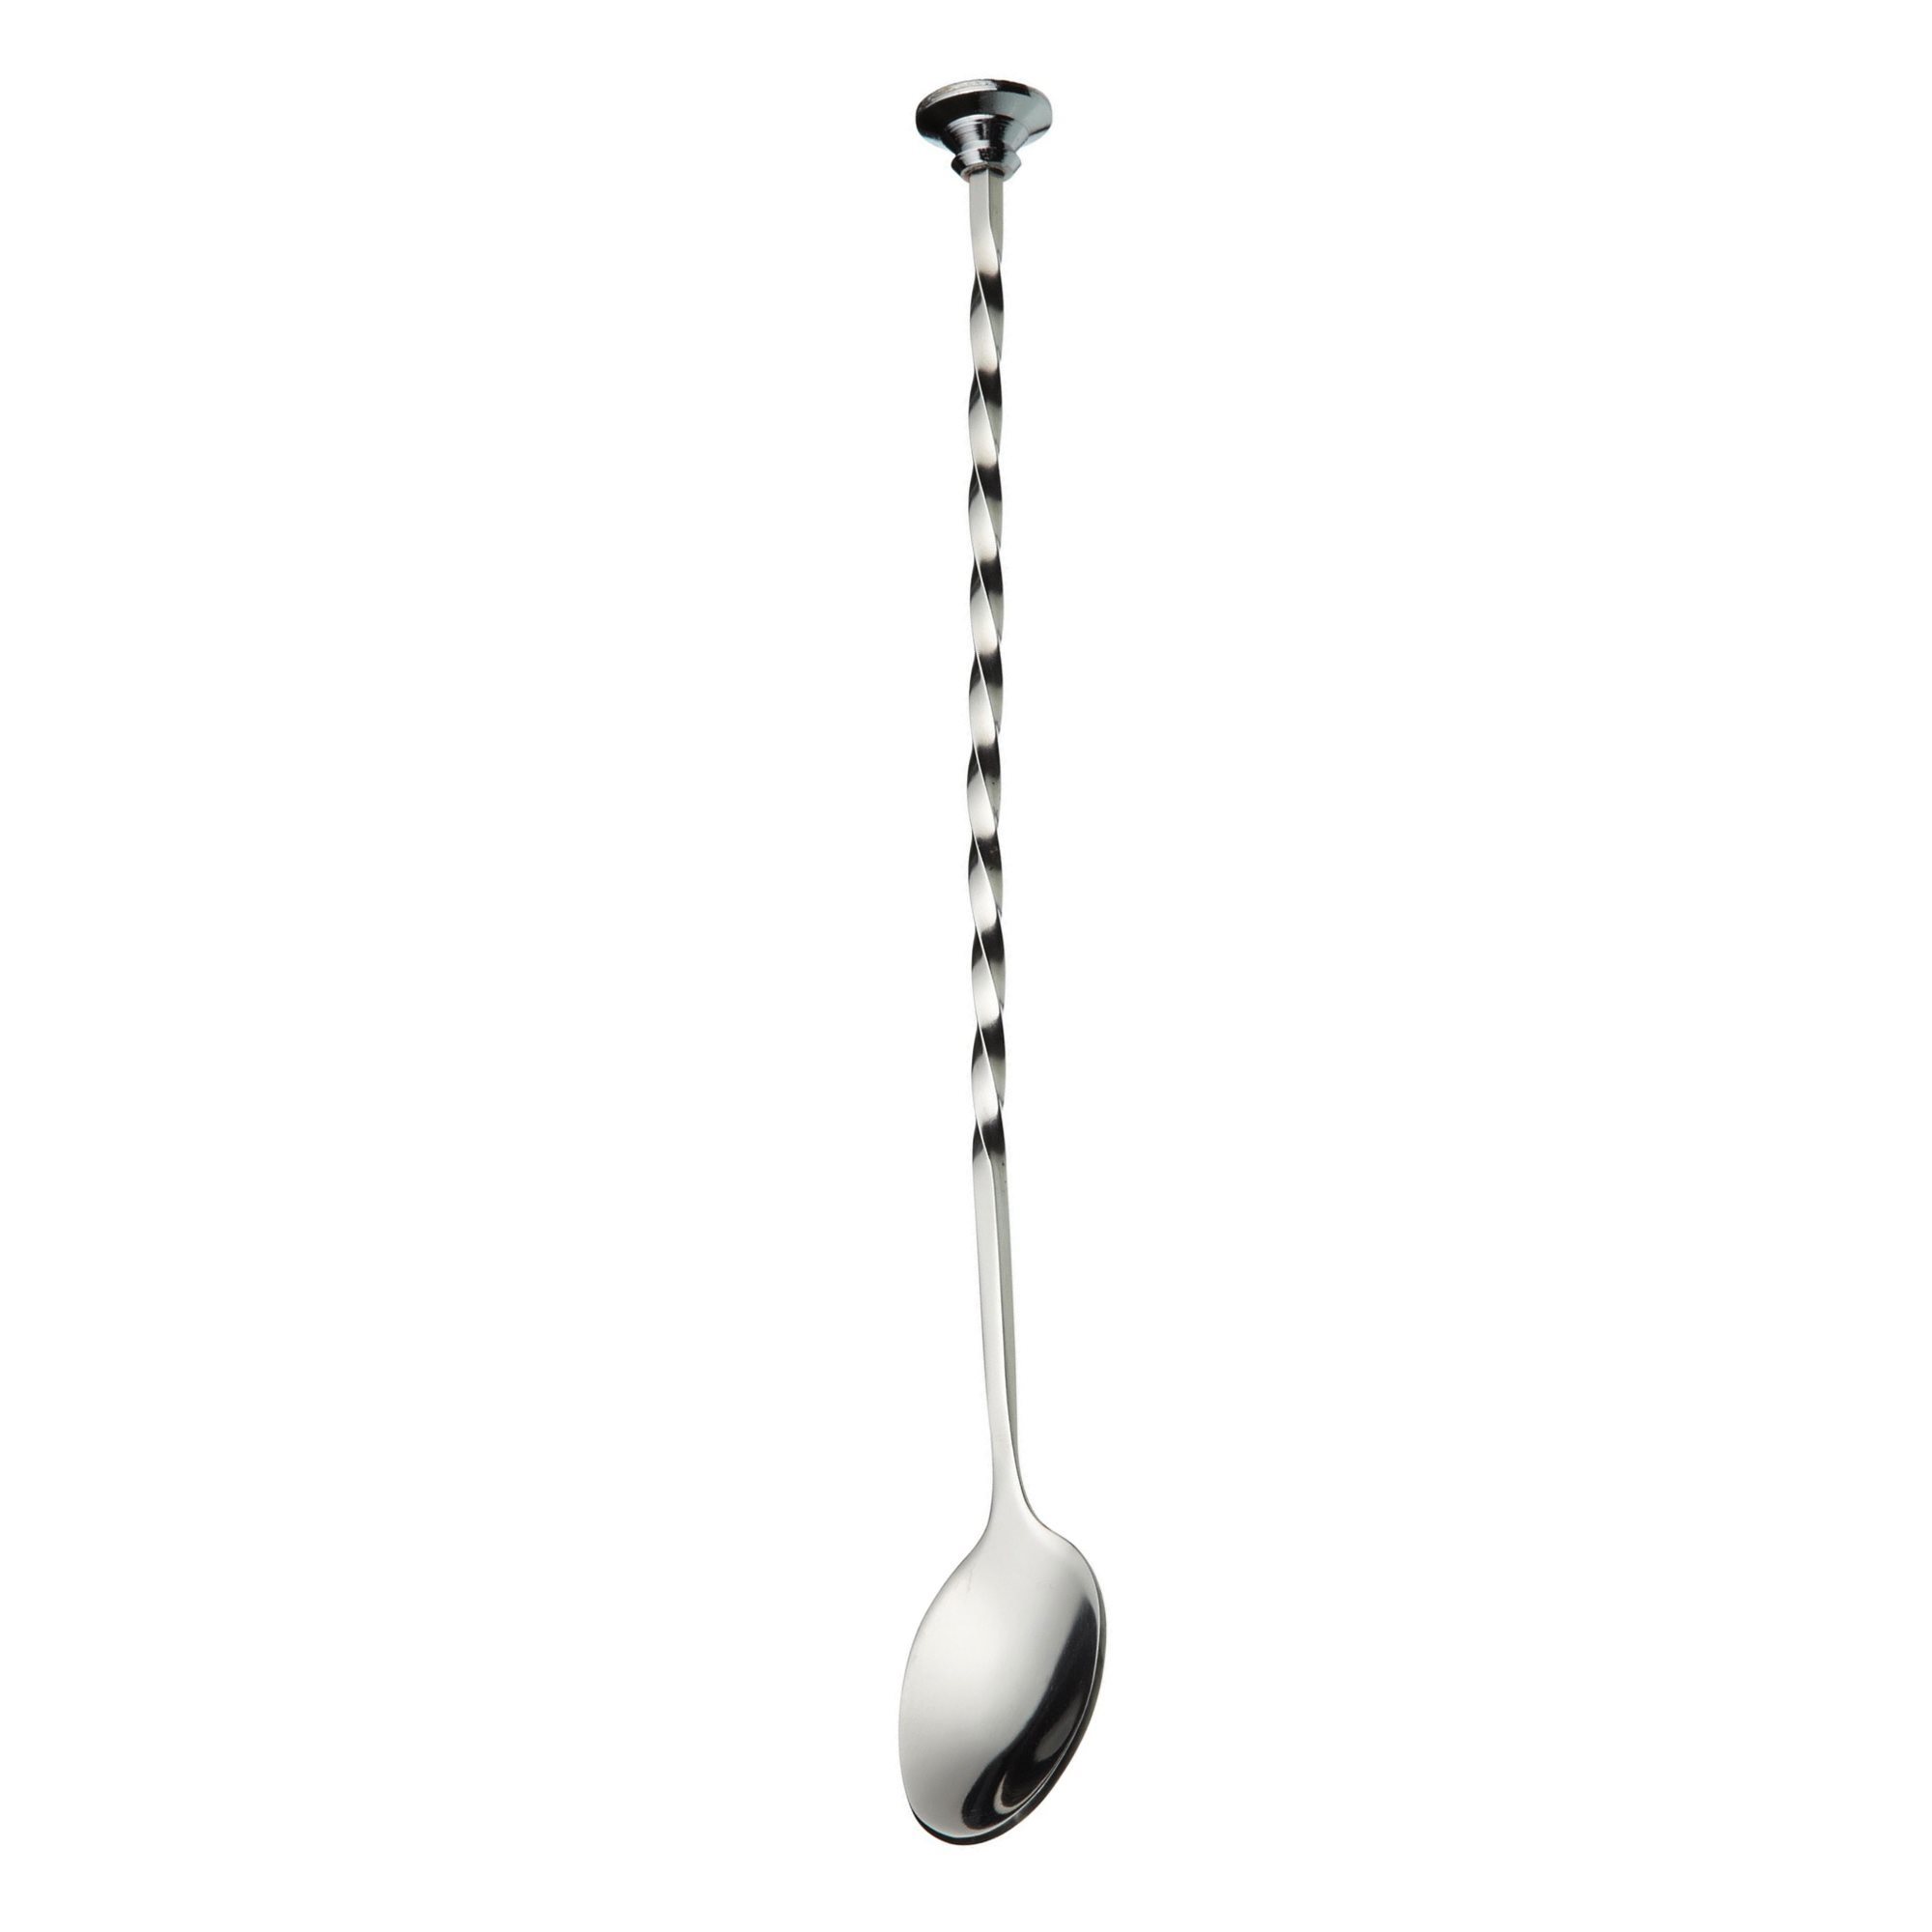 Twist Measuring Spoons, Made of Stainless Steel